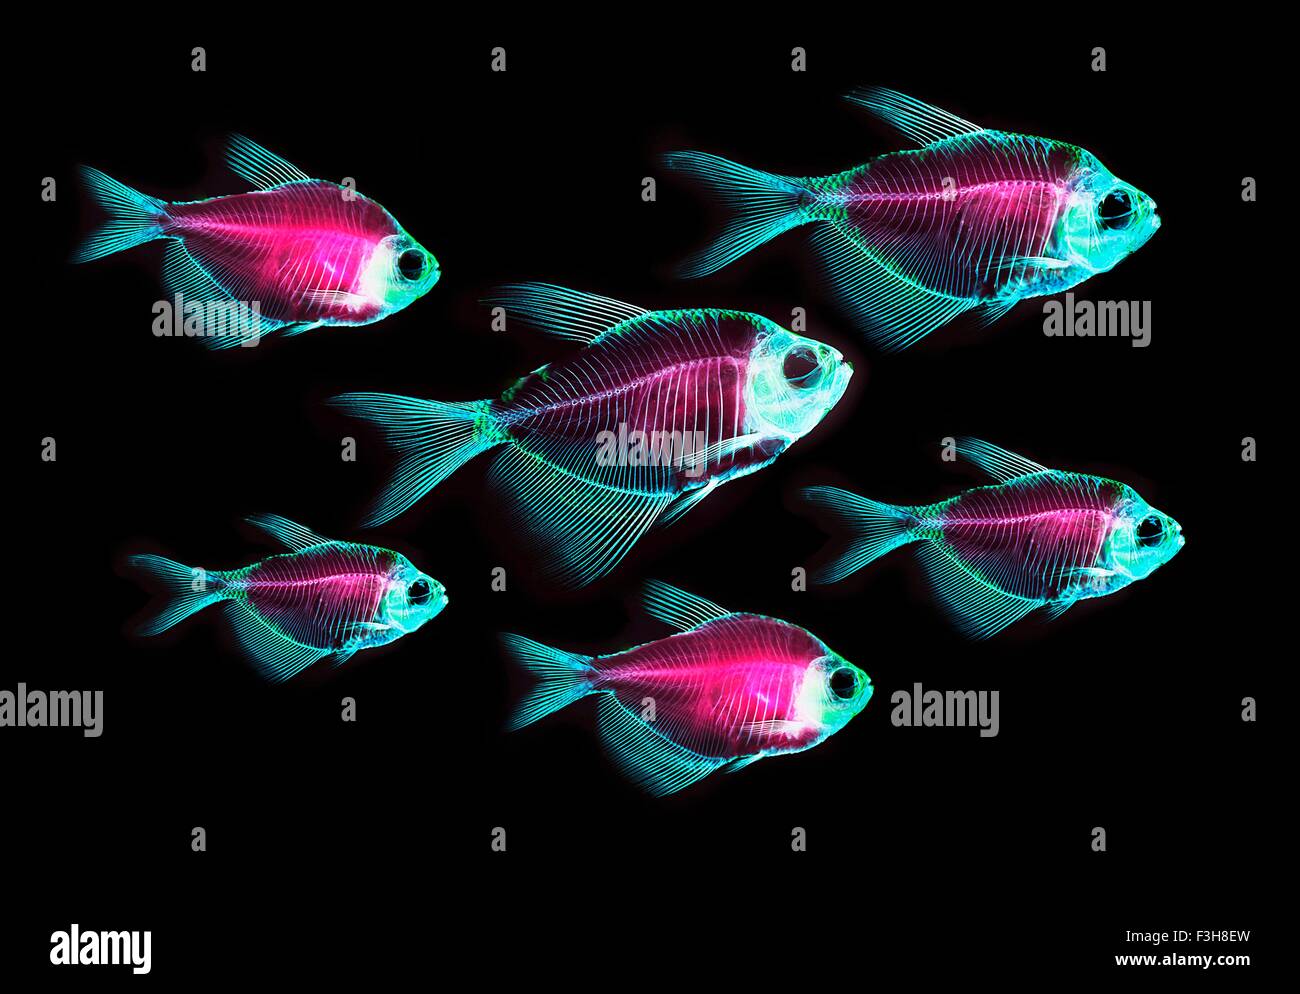 Alizarin red bone stain anatomical fish skeleton preparation of a white finned tetra Stock Photo